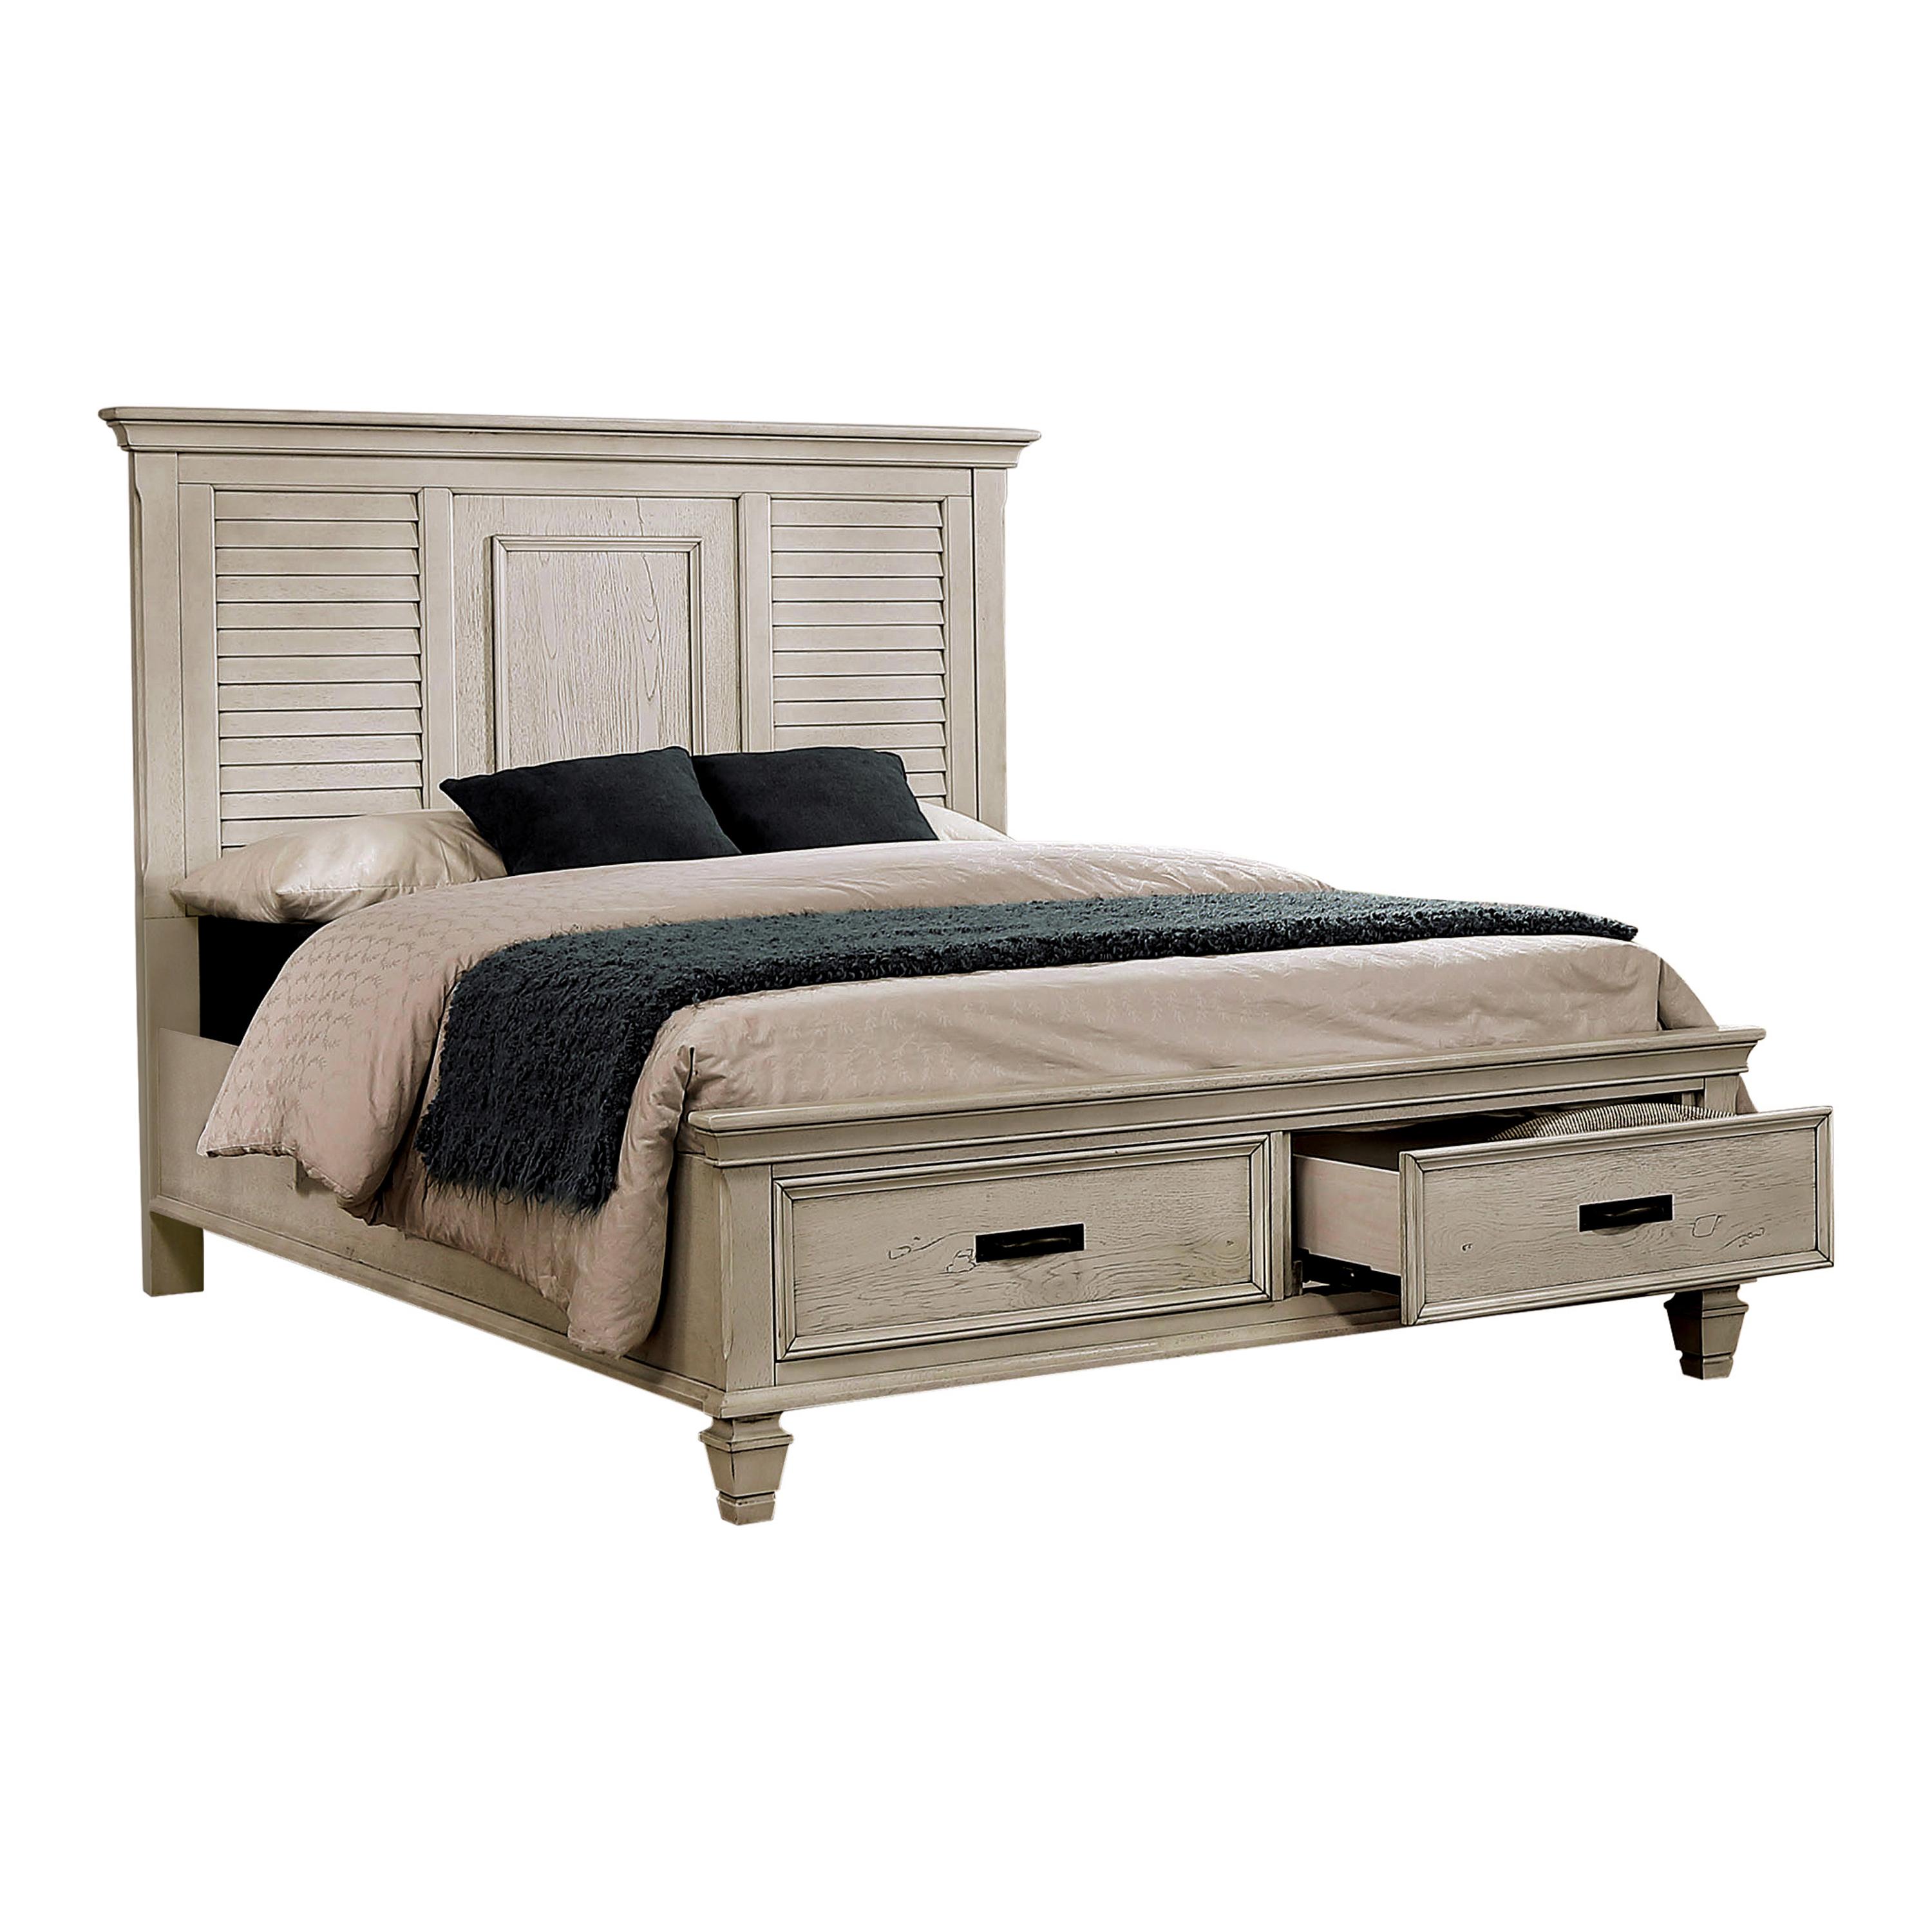 Transitional Storage Bed 205330KW Franco 205330KW in Antique White 